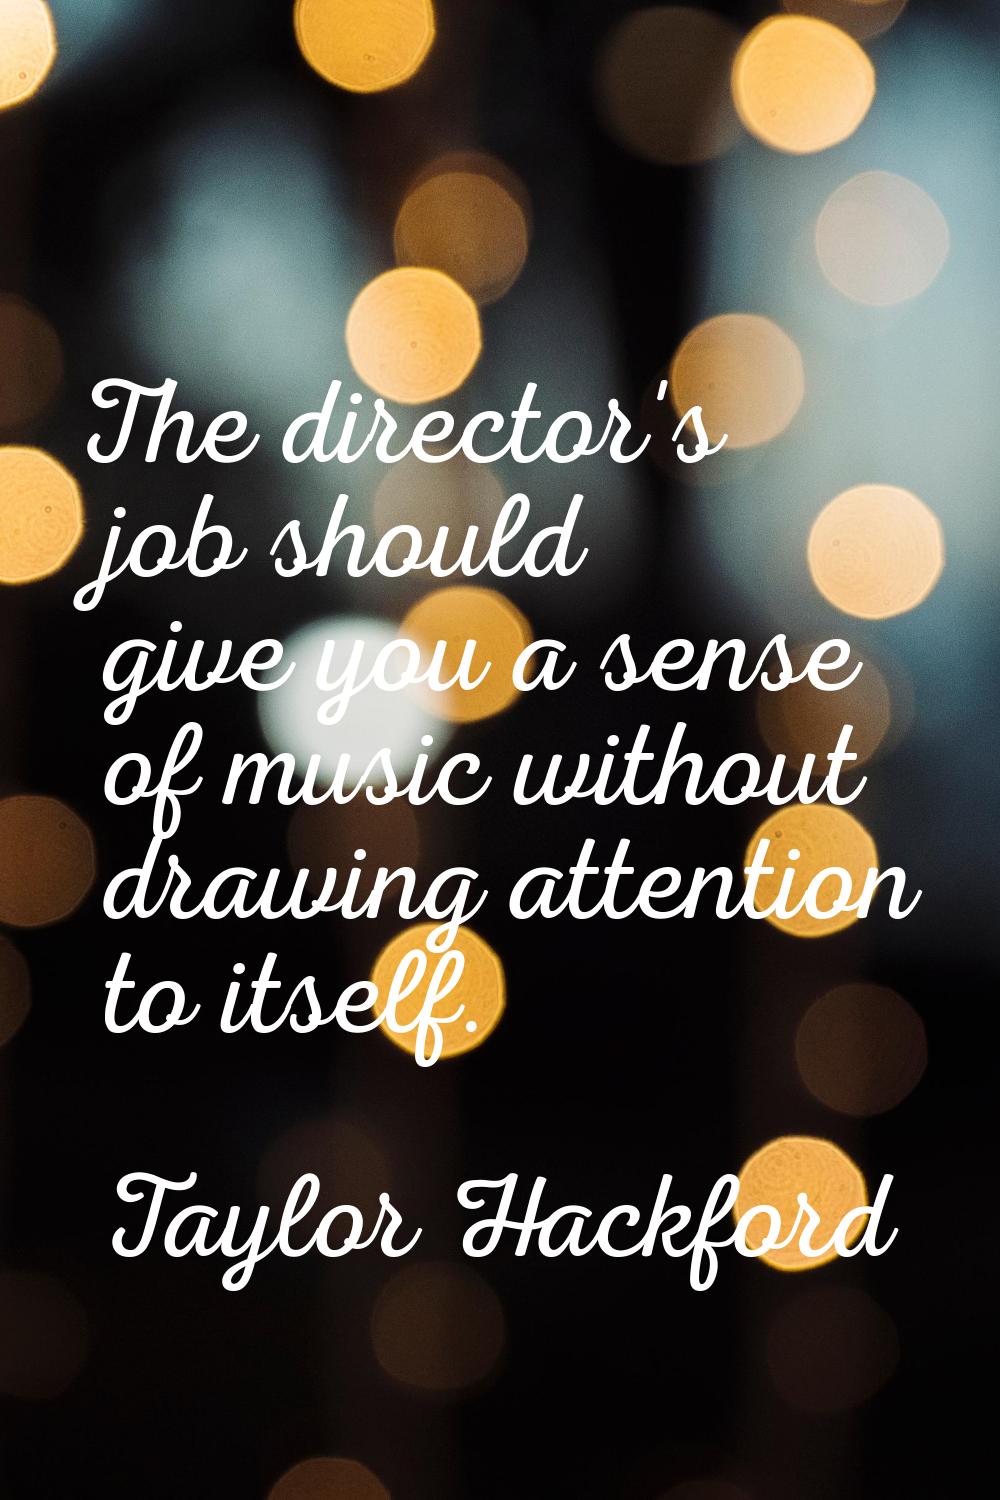 The director's job should give you a sense of music without drawing attention to itself.